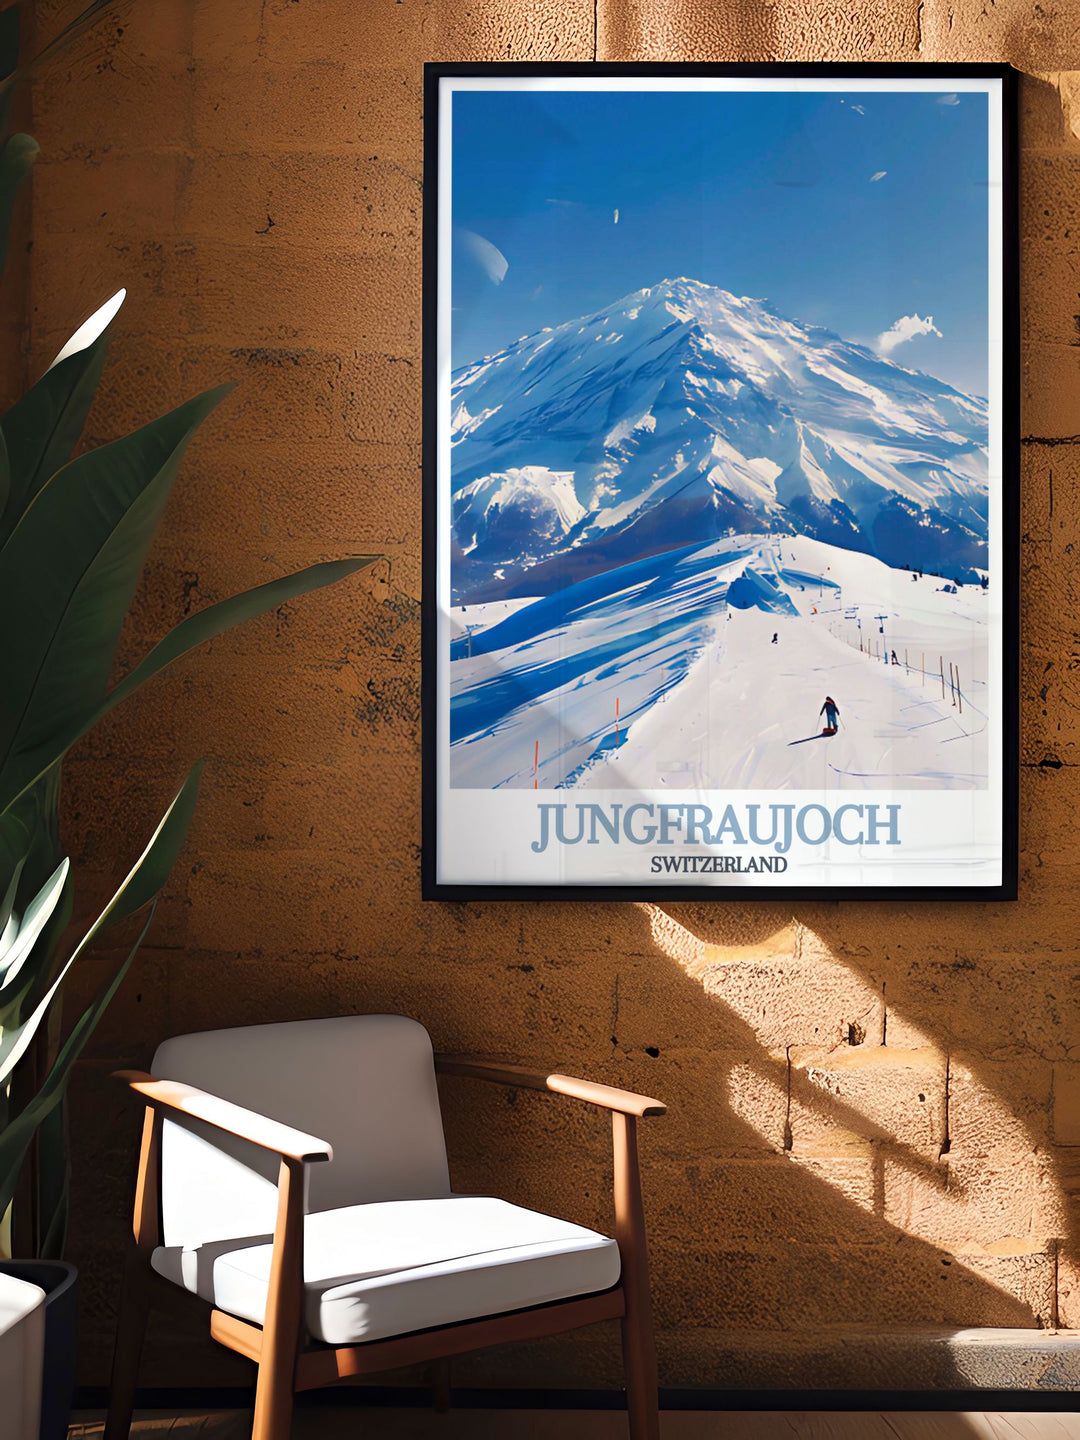 A vibrant and detailed art print of Jungfraujoch, featuring the highest railway station in Europe and the breathtaking views of the Swiss Alps. This piece celebrates the natural beauty and adventure of Switzerland.